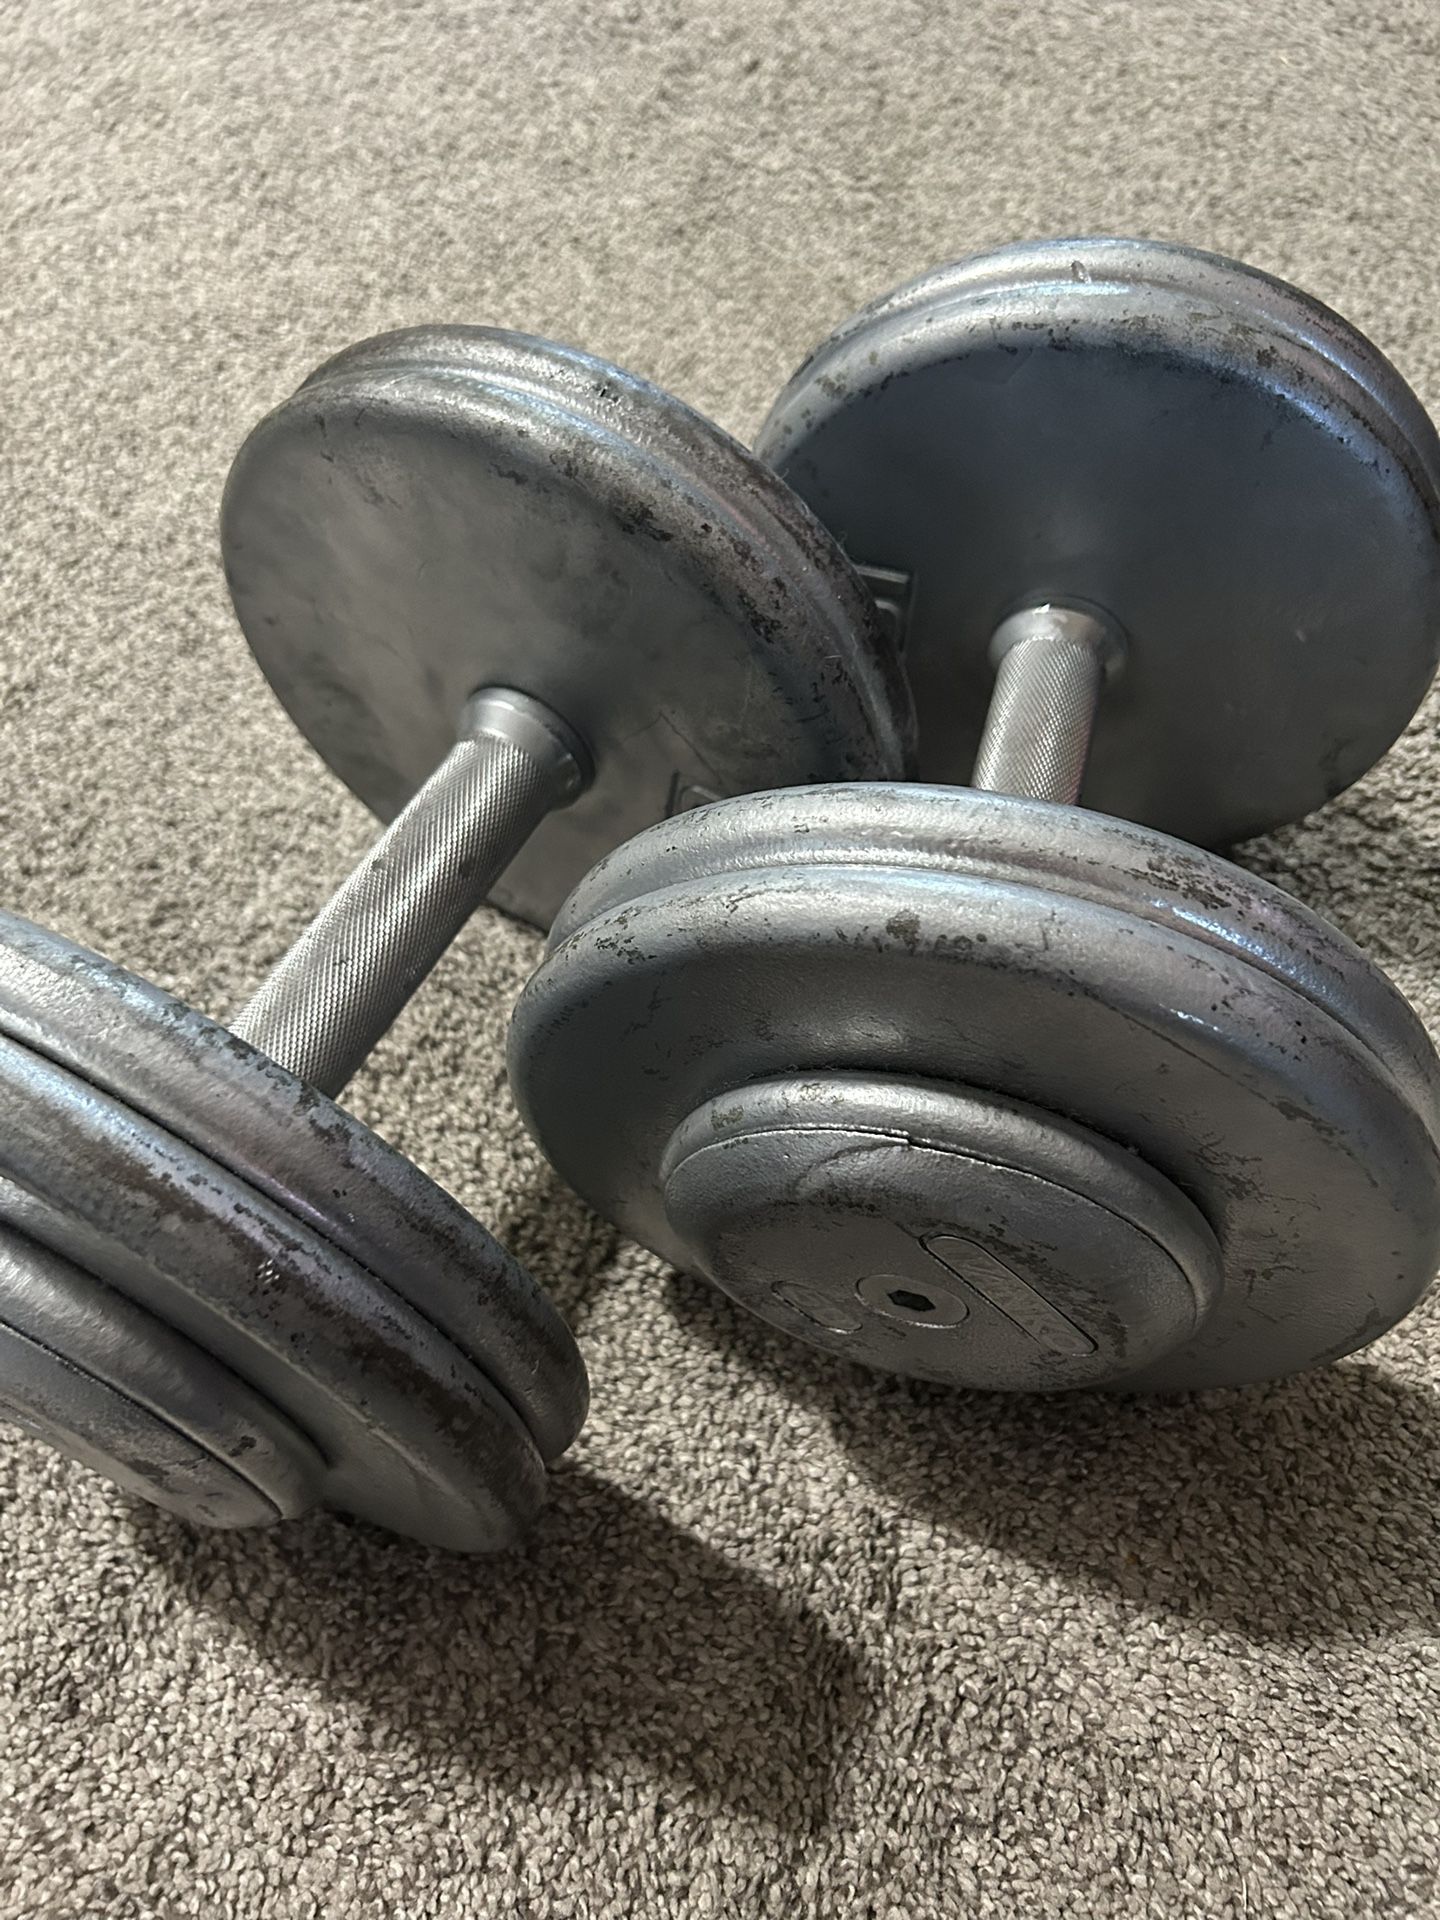 Pair Of 50 Pound Dumbbell Round